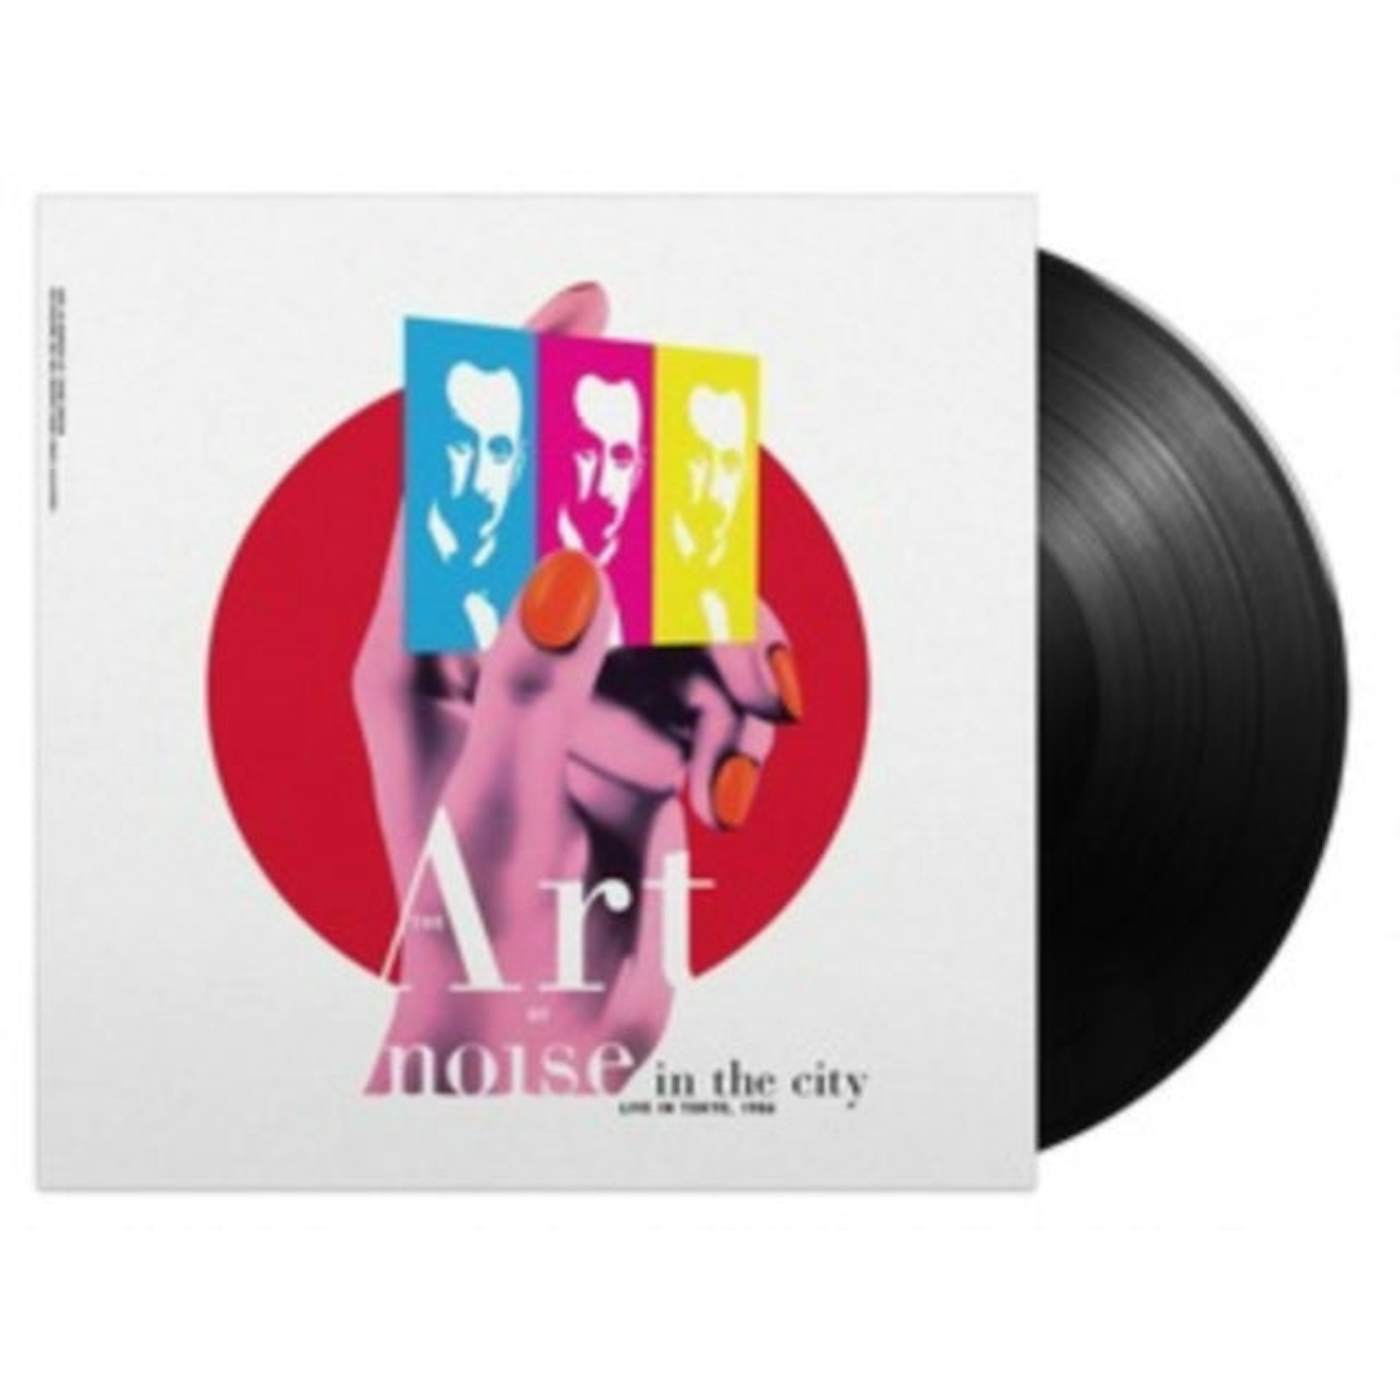 The Art Of Noise LP Vinyl Record - Noise In The City: Live In Tokyo / 19 86